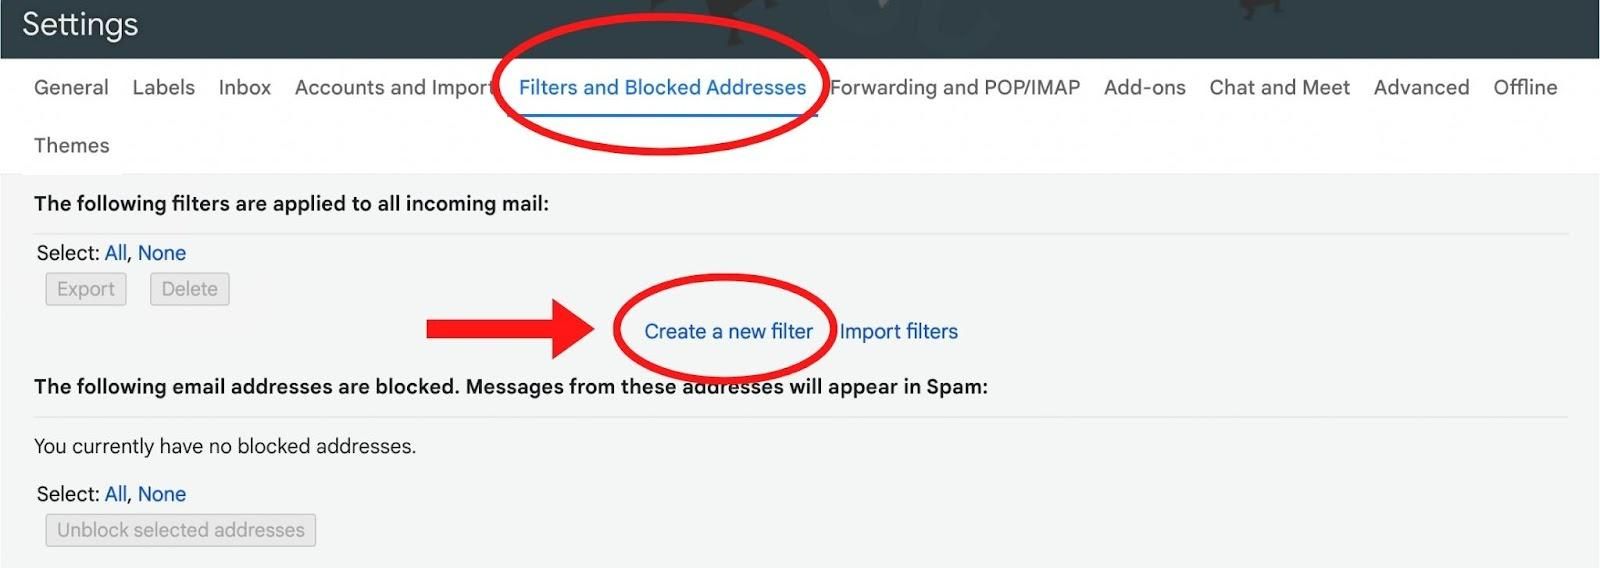 filters and blocked addresses